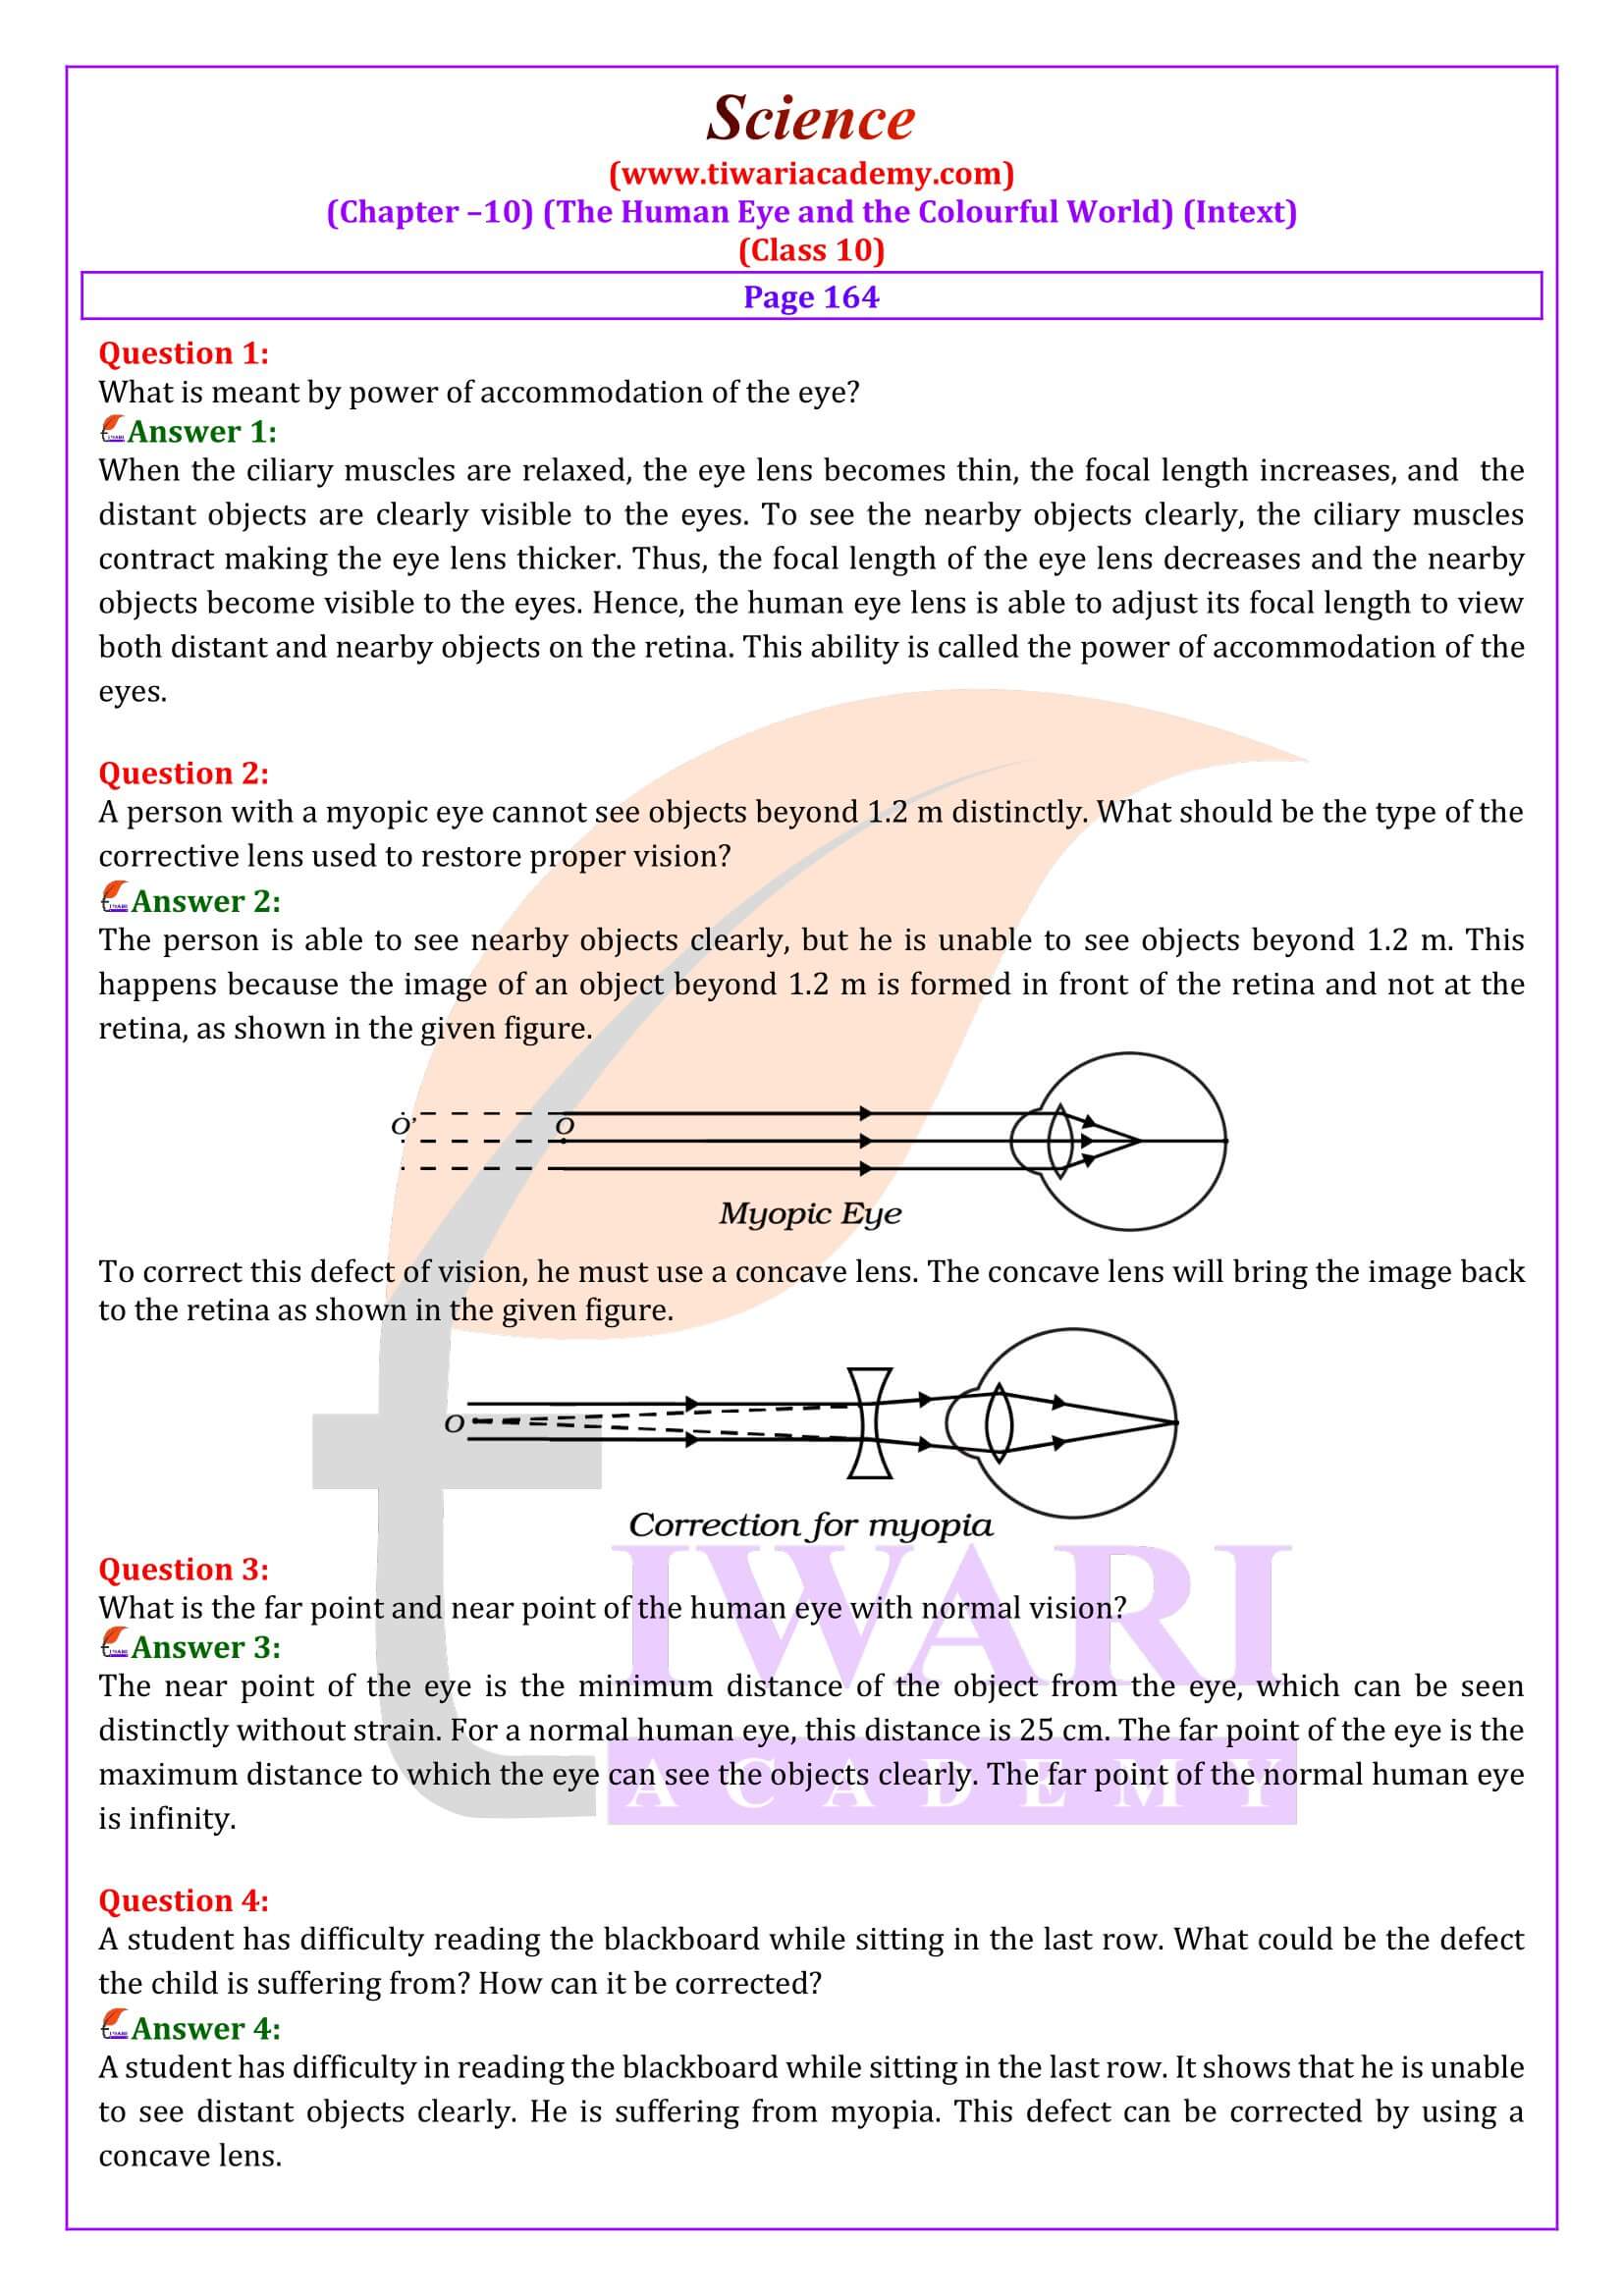 NCERT Solutions for Class 10 Science Chapter 10 Intext Questions